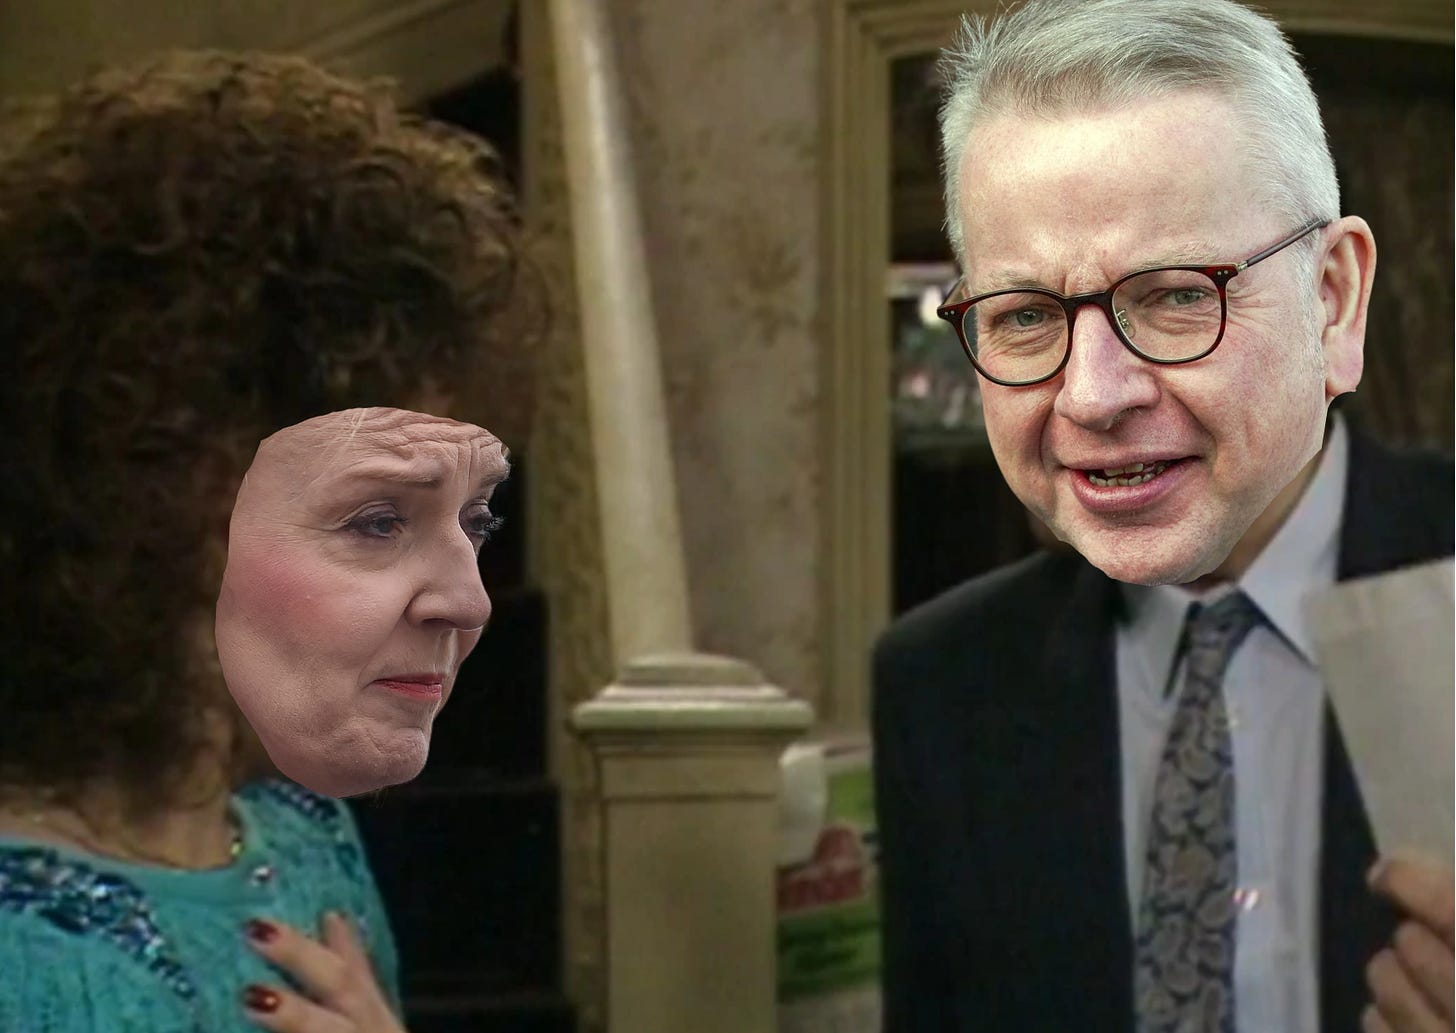 Michael Gove and Liz Truss in the 'Dirty Den serves Angie with divorce papers' scene from Eastenders